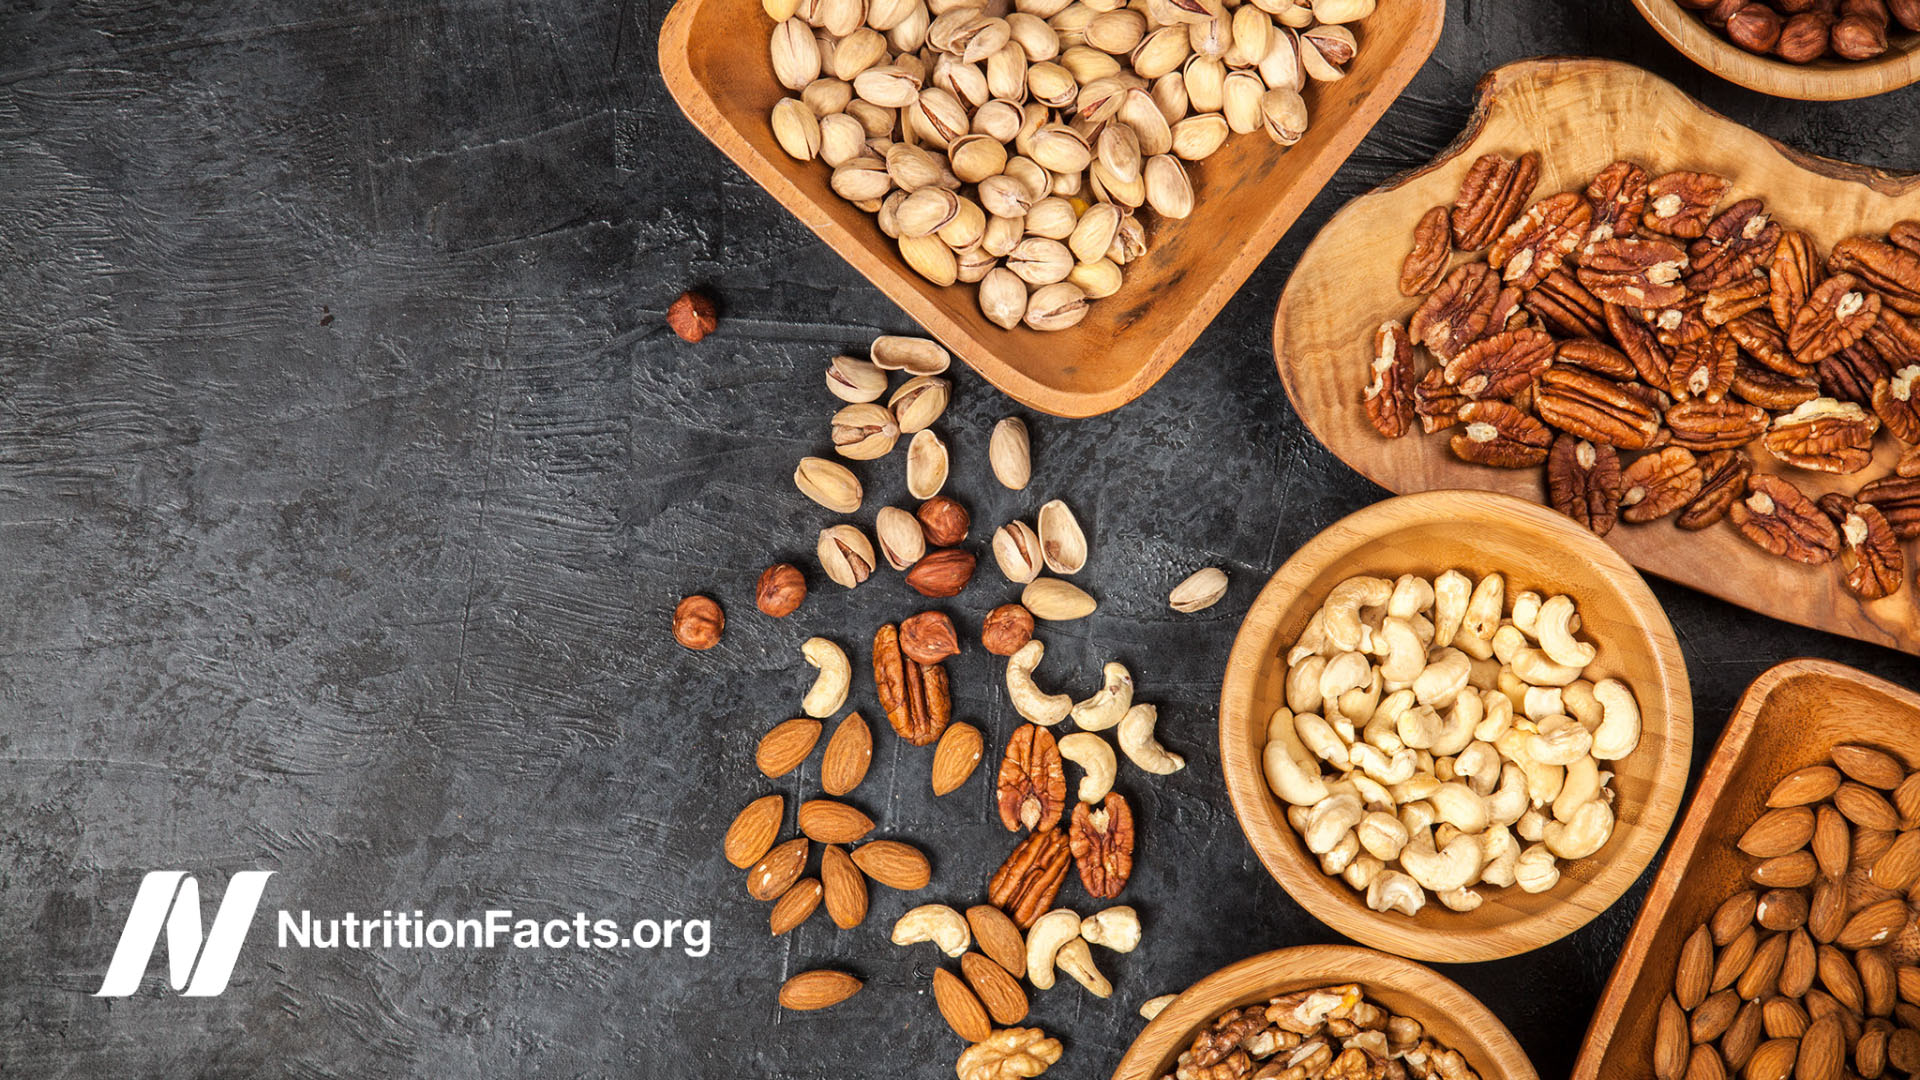 Are the Health Benefits of Nuts Limited to Those Eating Bad Diets?